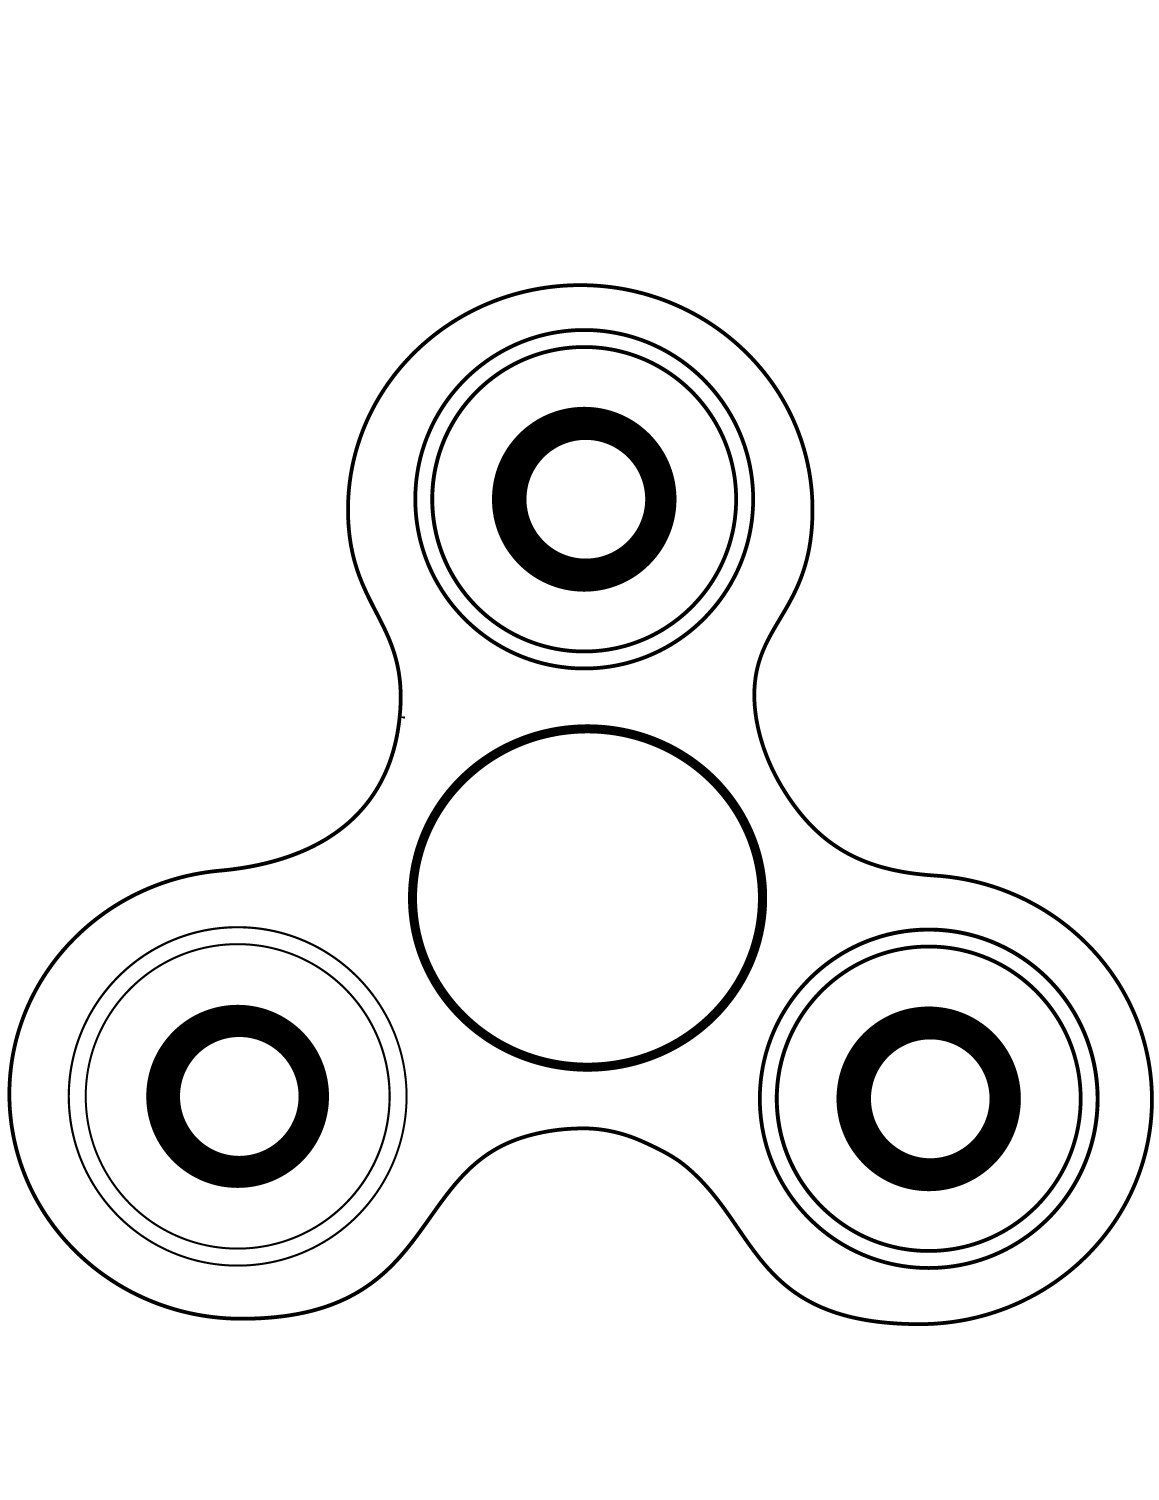 Fidget Spinner Coloring Page Free Printable Coloring Pages For Kids